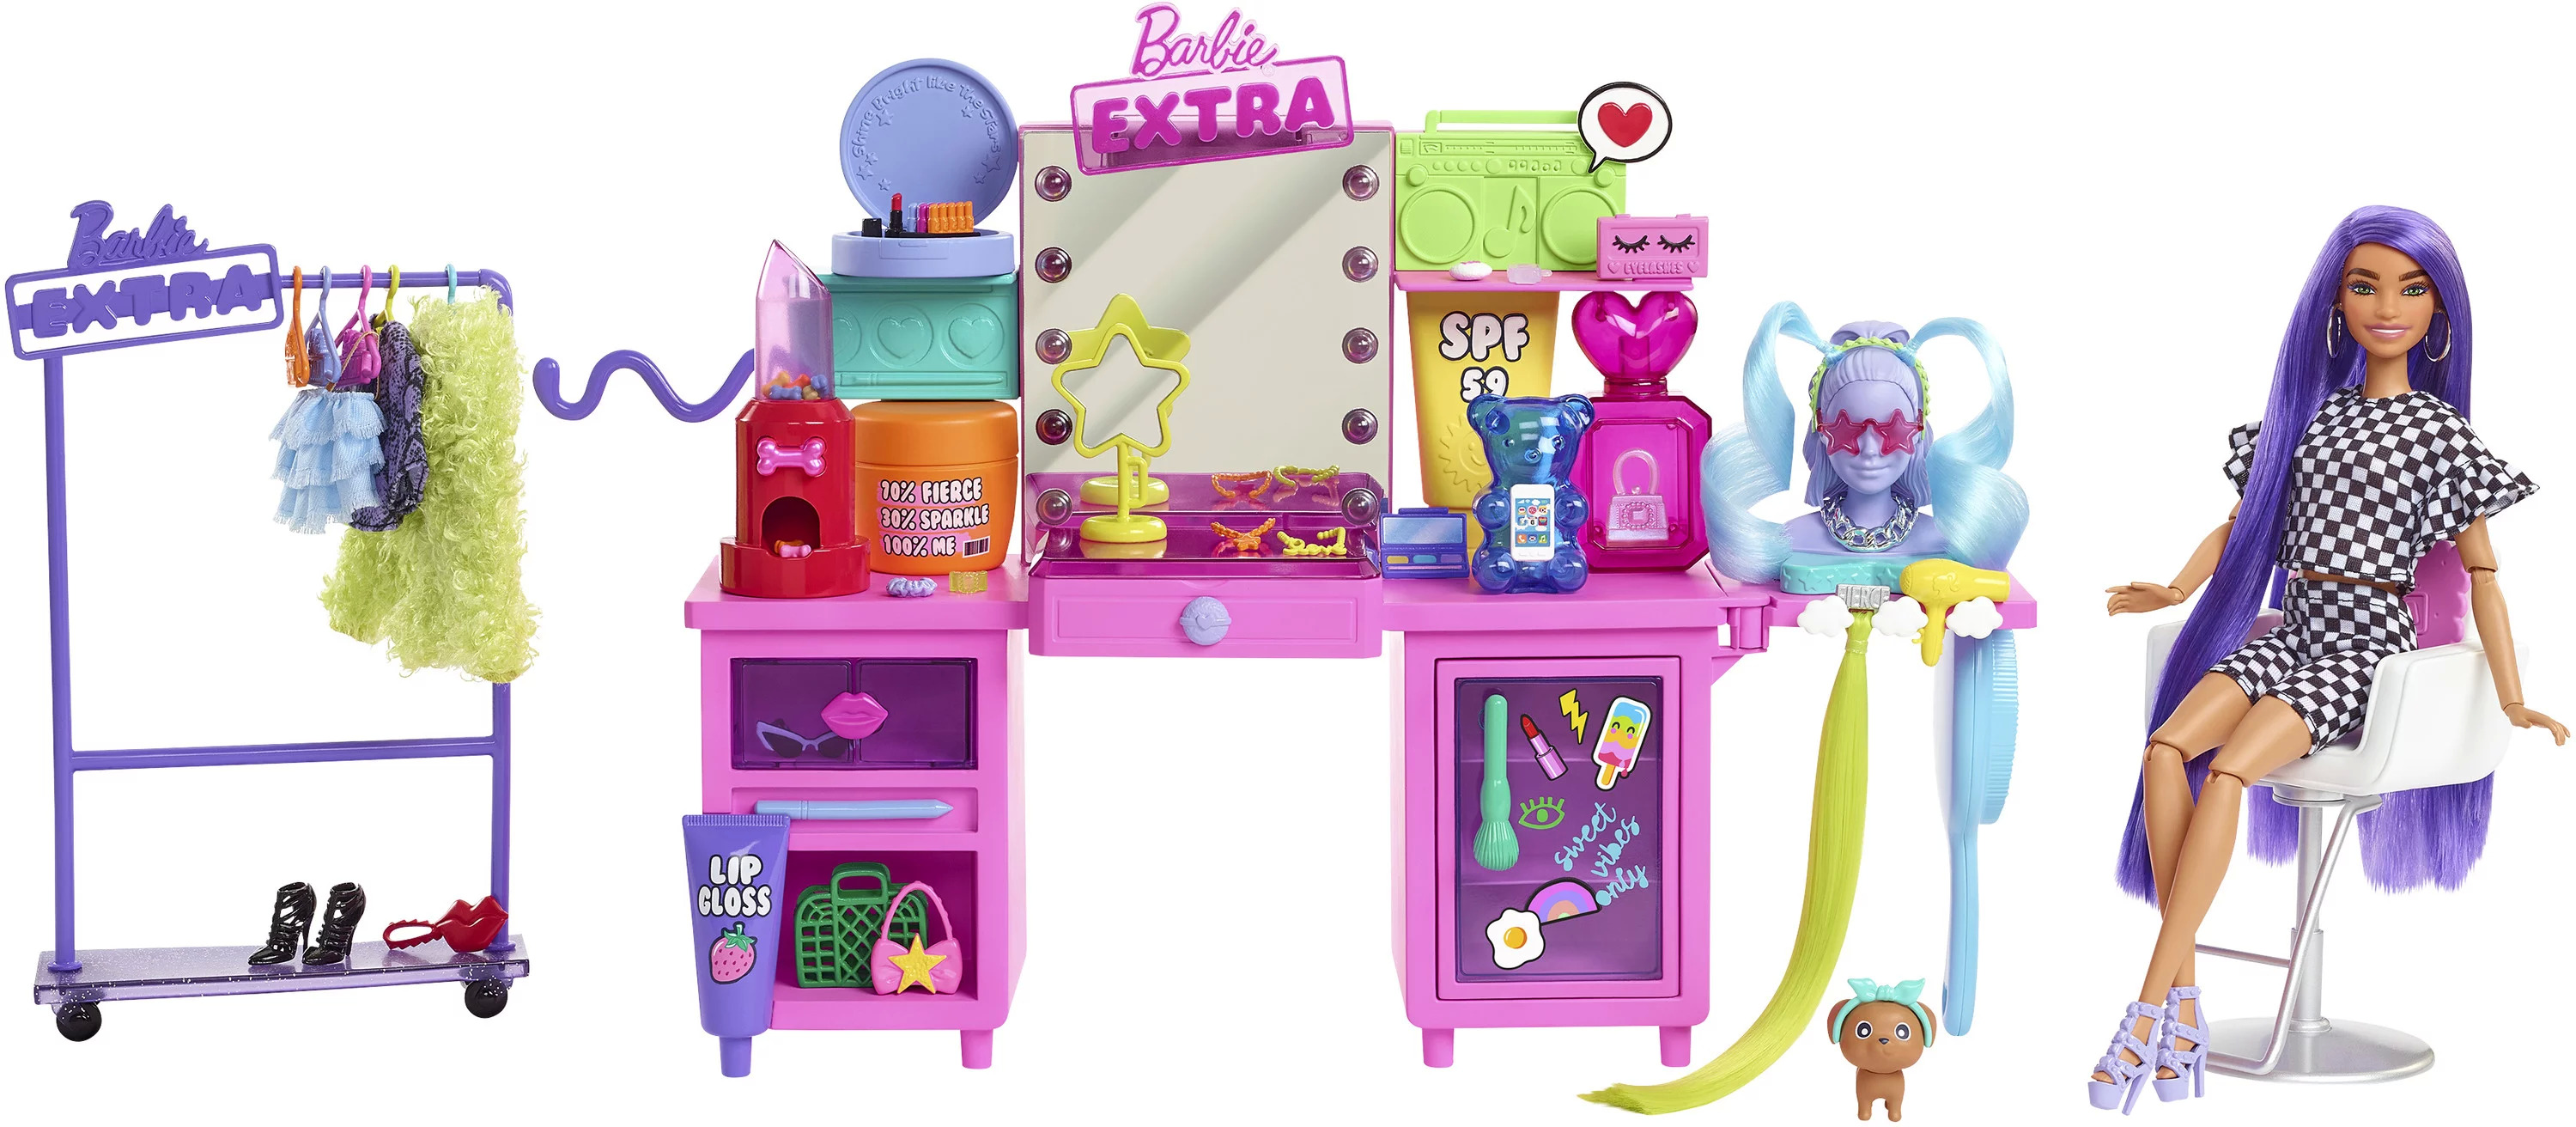 45+ Piece Barbie Extra Doll & Vanity Playset $34.97 + Free Shipping